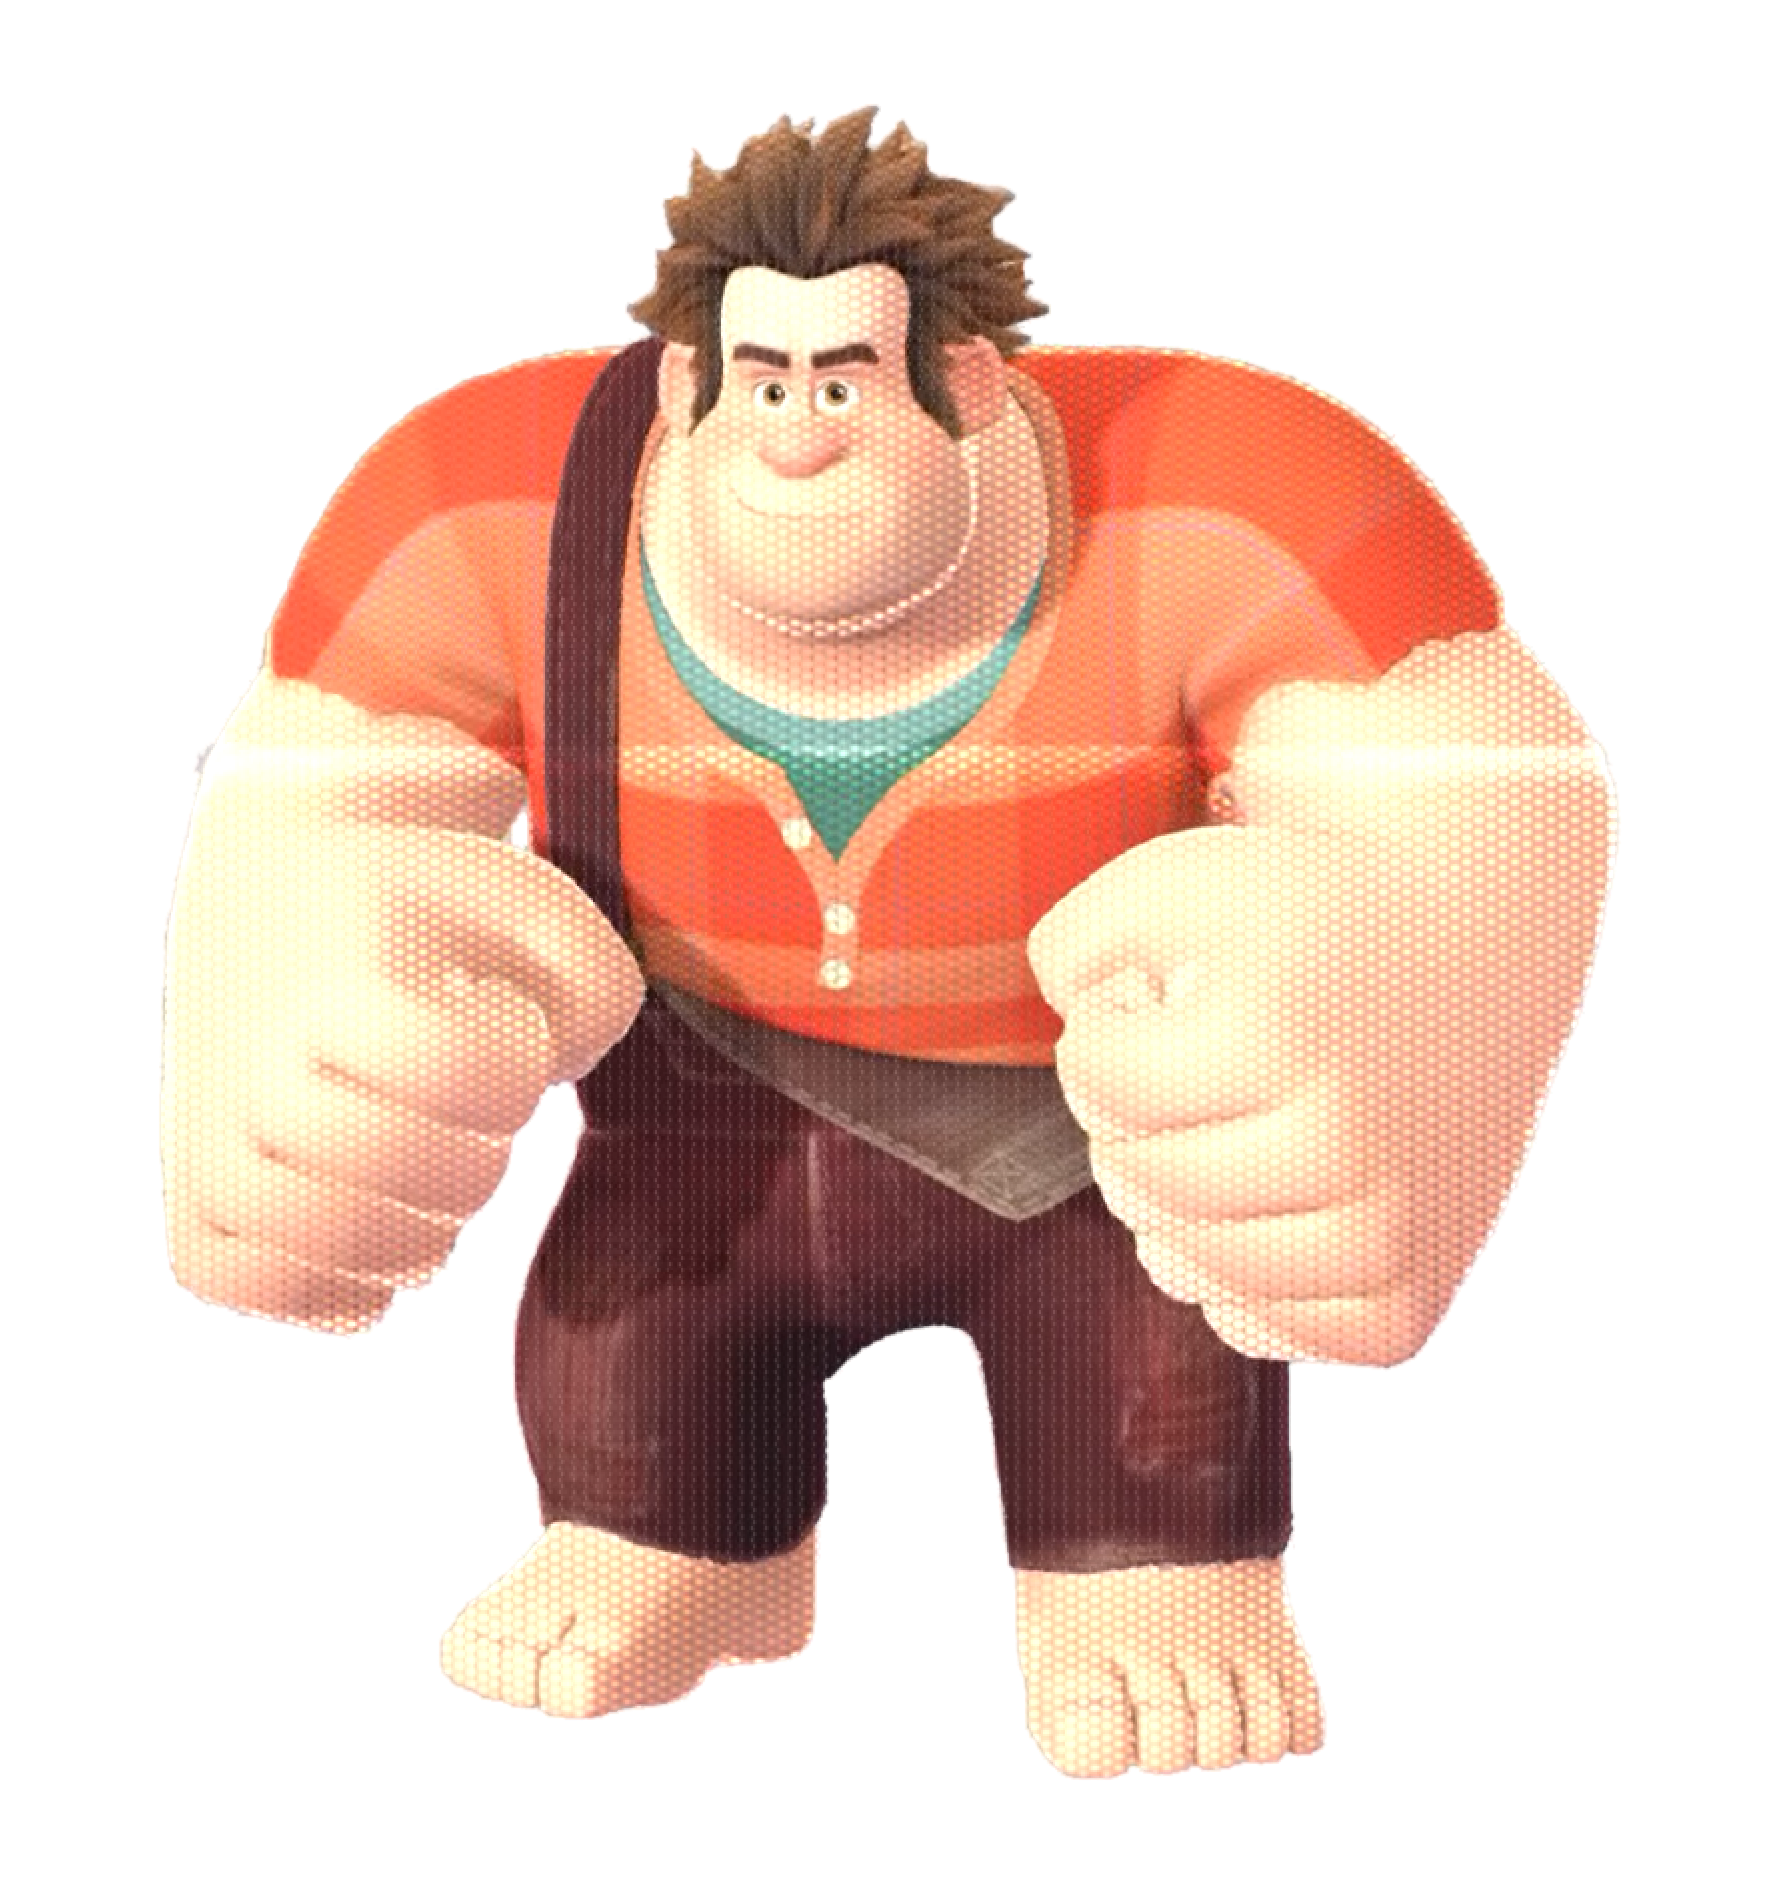 wreck it ralph free online movie streaming